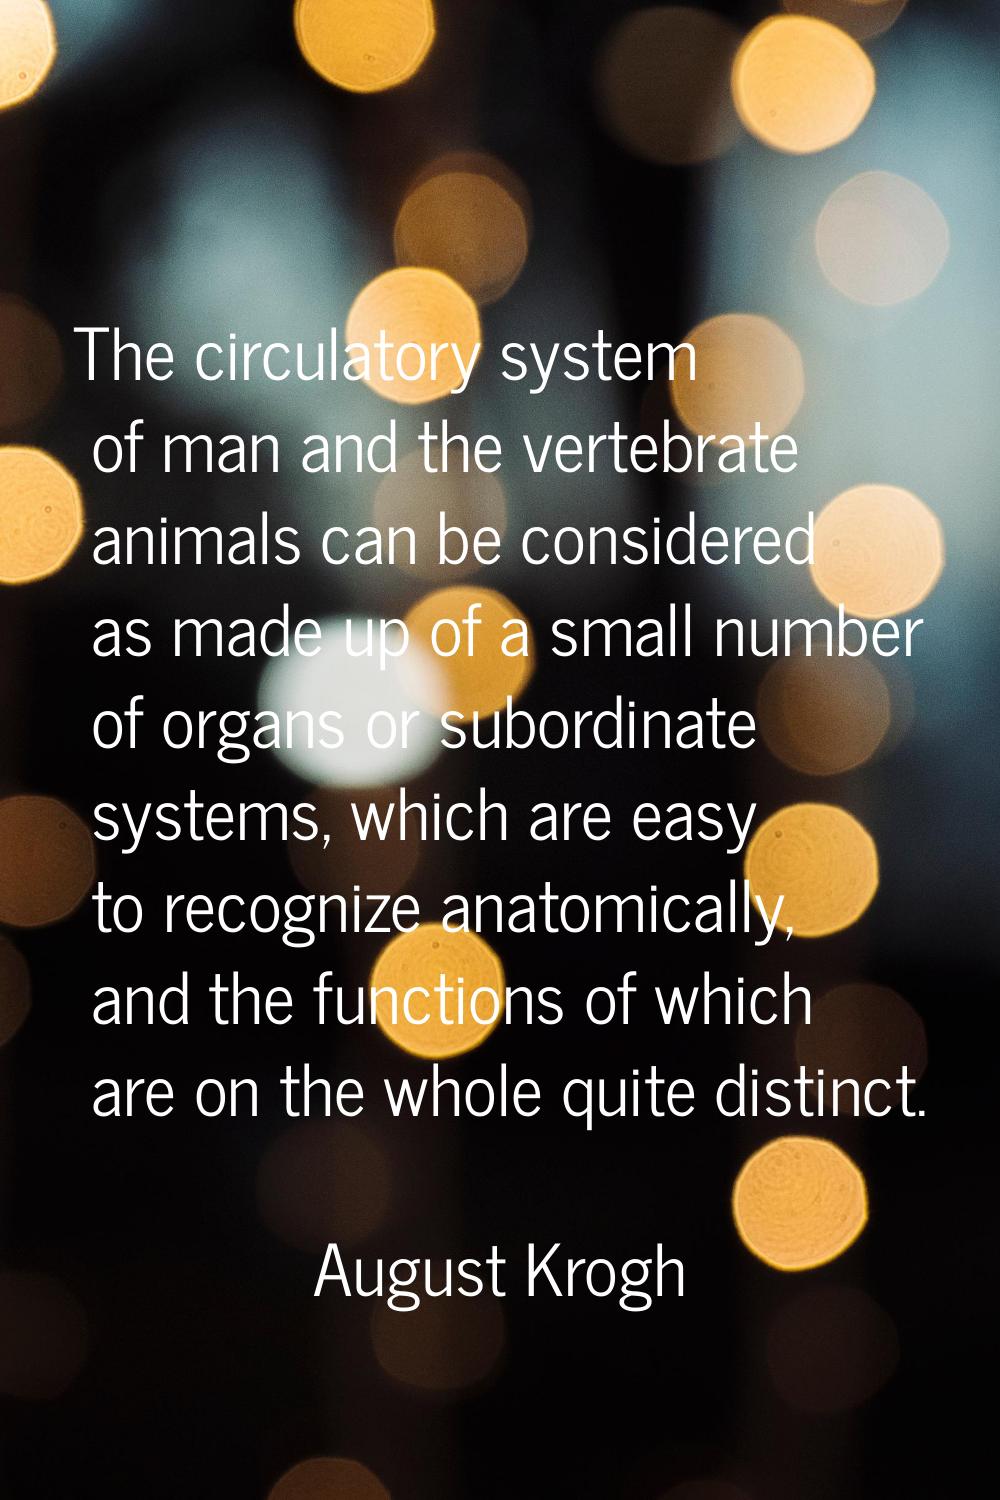 The circulatory system of man and the vertebrate animals can be considered as made up of a small nu